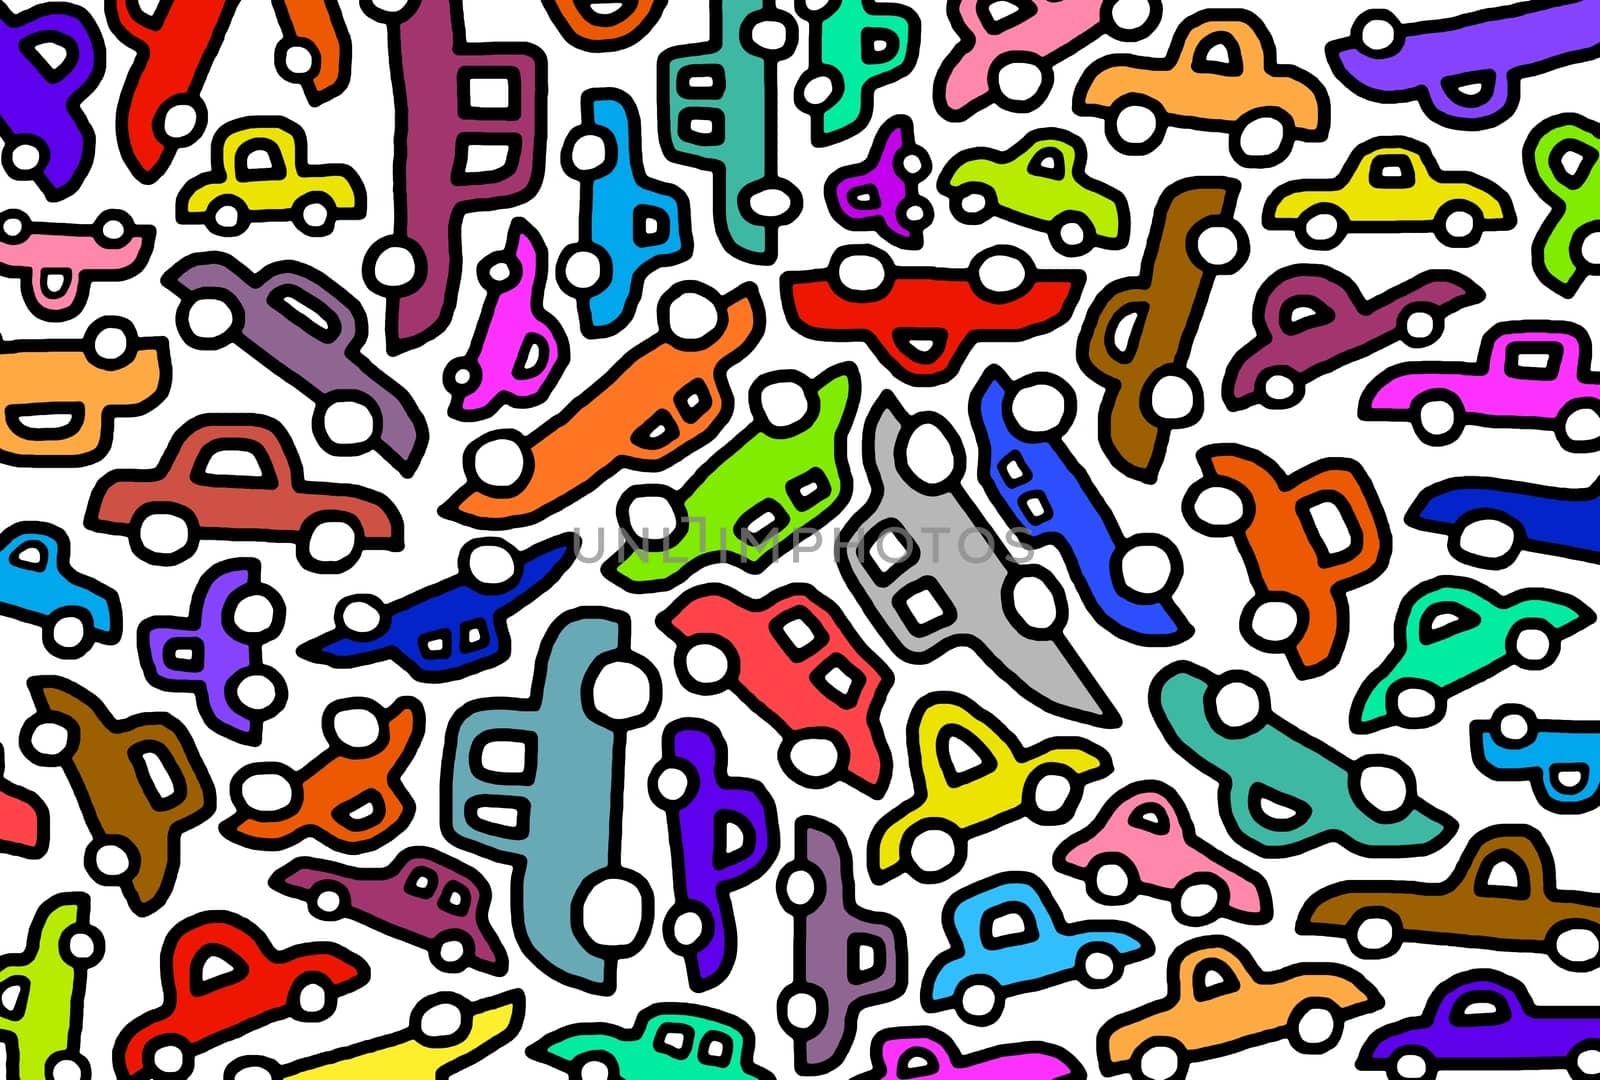 Illustration of many colorful cars all jumbled together